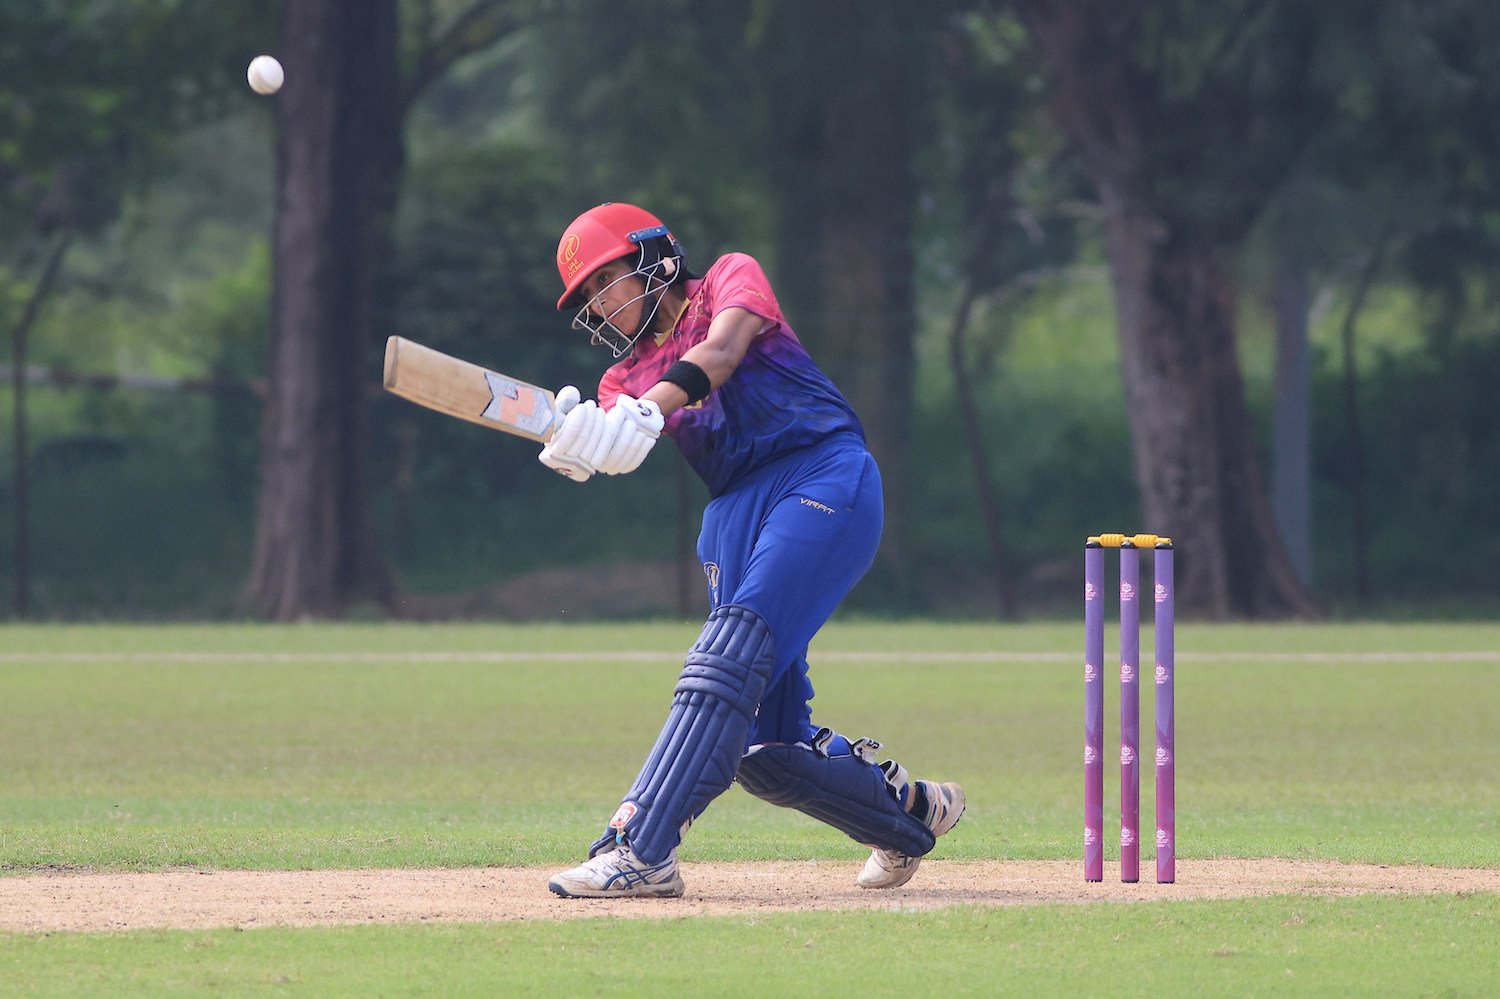 UAE Opener Esha Oza hits the ball into the leg side for four during her side’s ICC Women’s T20 World Cup Asia Qualifier semi-final against Hong Kong at Bayuemas Oval. Photo: ICC